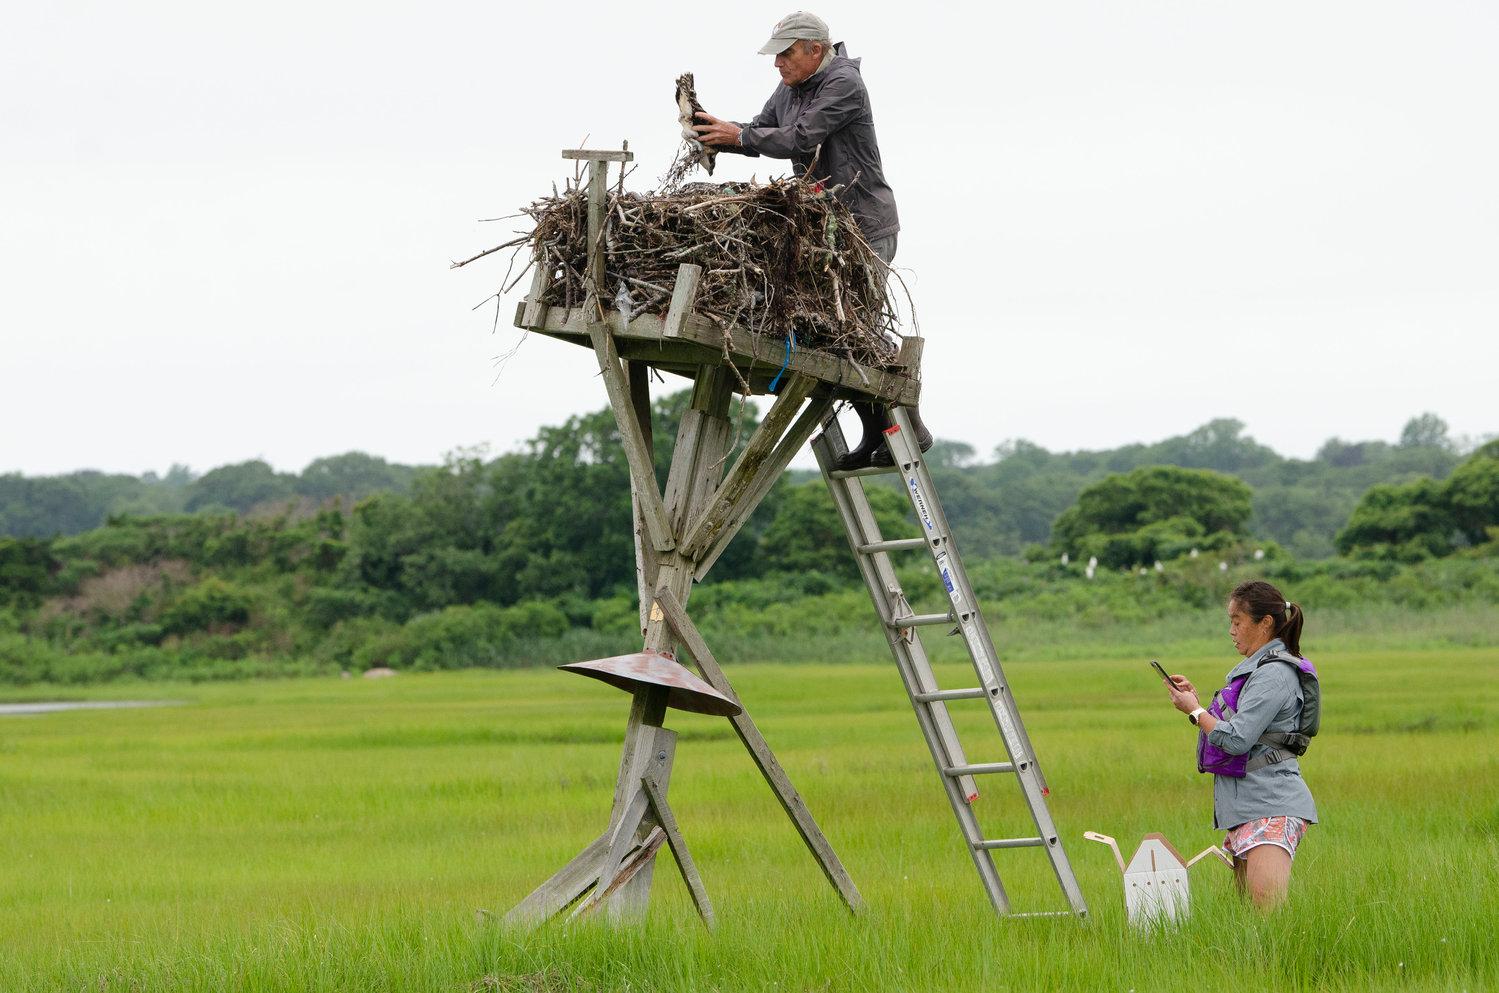 20 year Mass Audubon volunteer, Dr. Alan Poole, lifts an osprey fledgling from it's nest while standing on a ladder. Tih-Fen Ting looks on at right. 